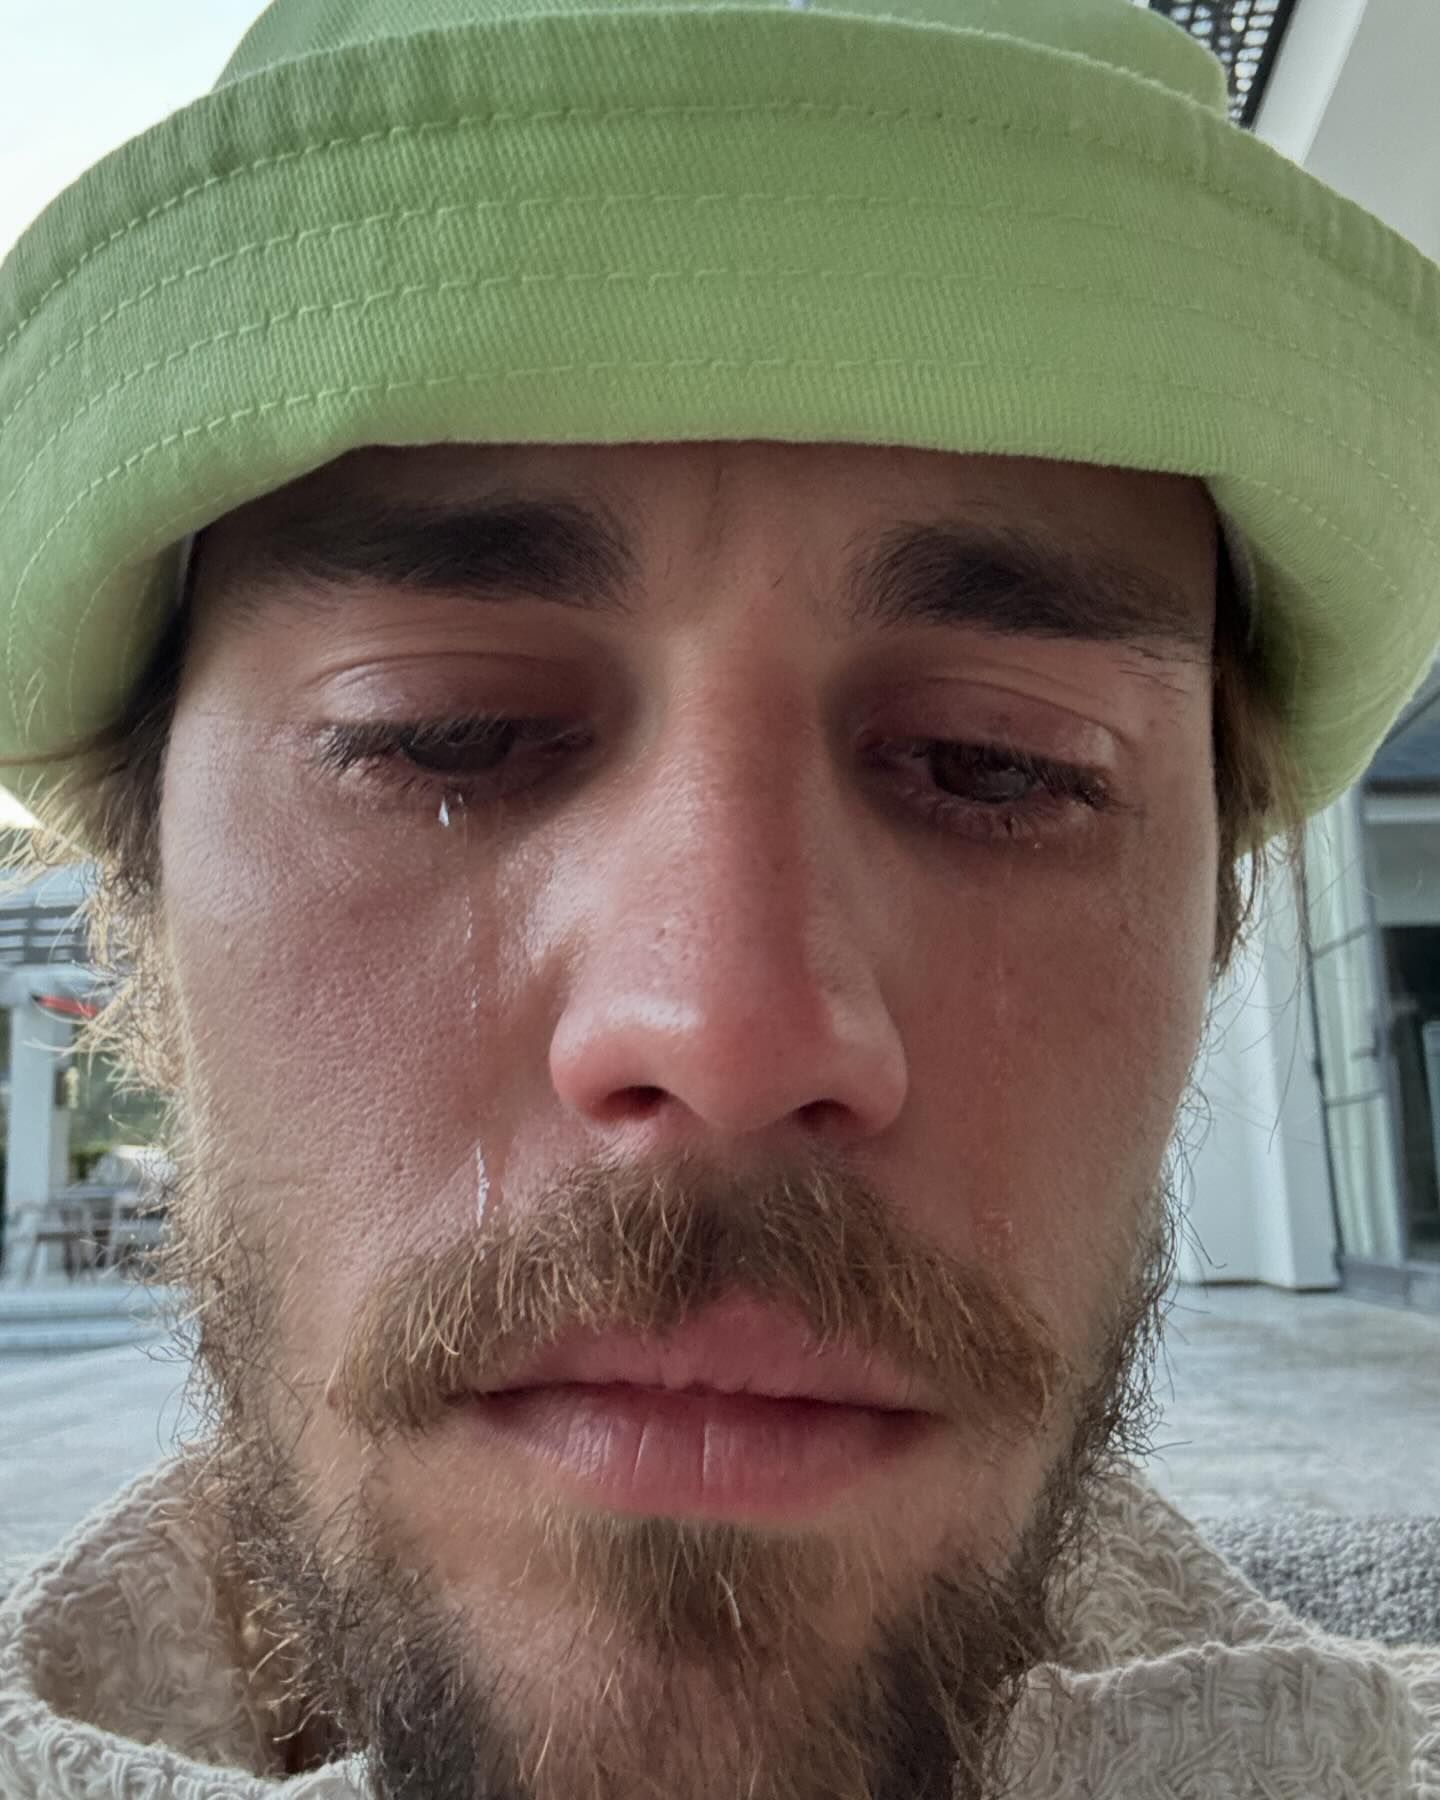 Justin shed tears in his personal post